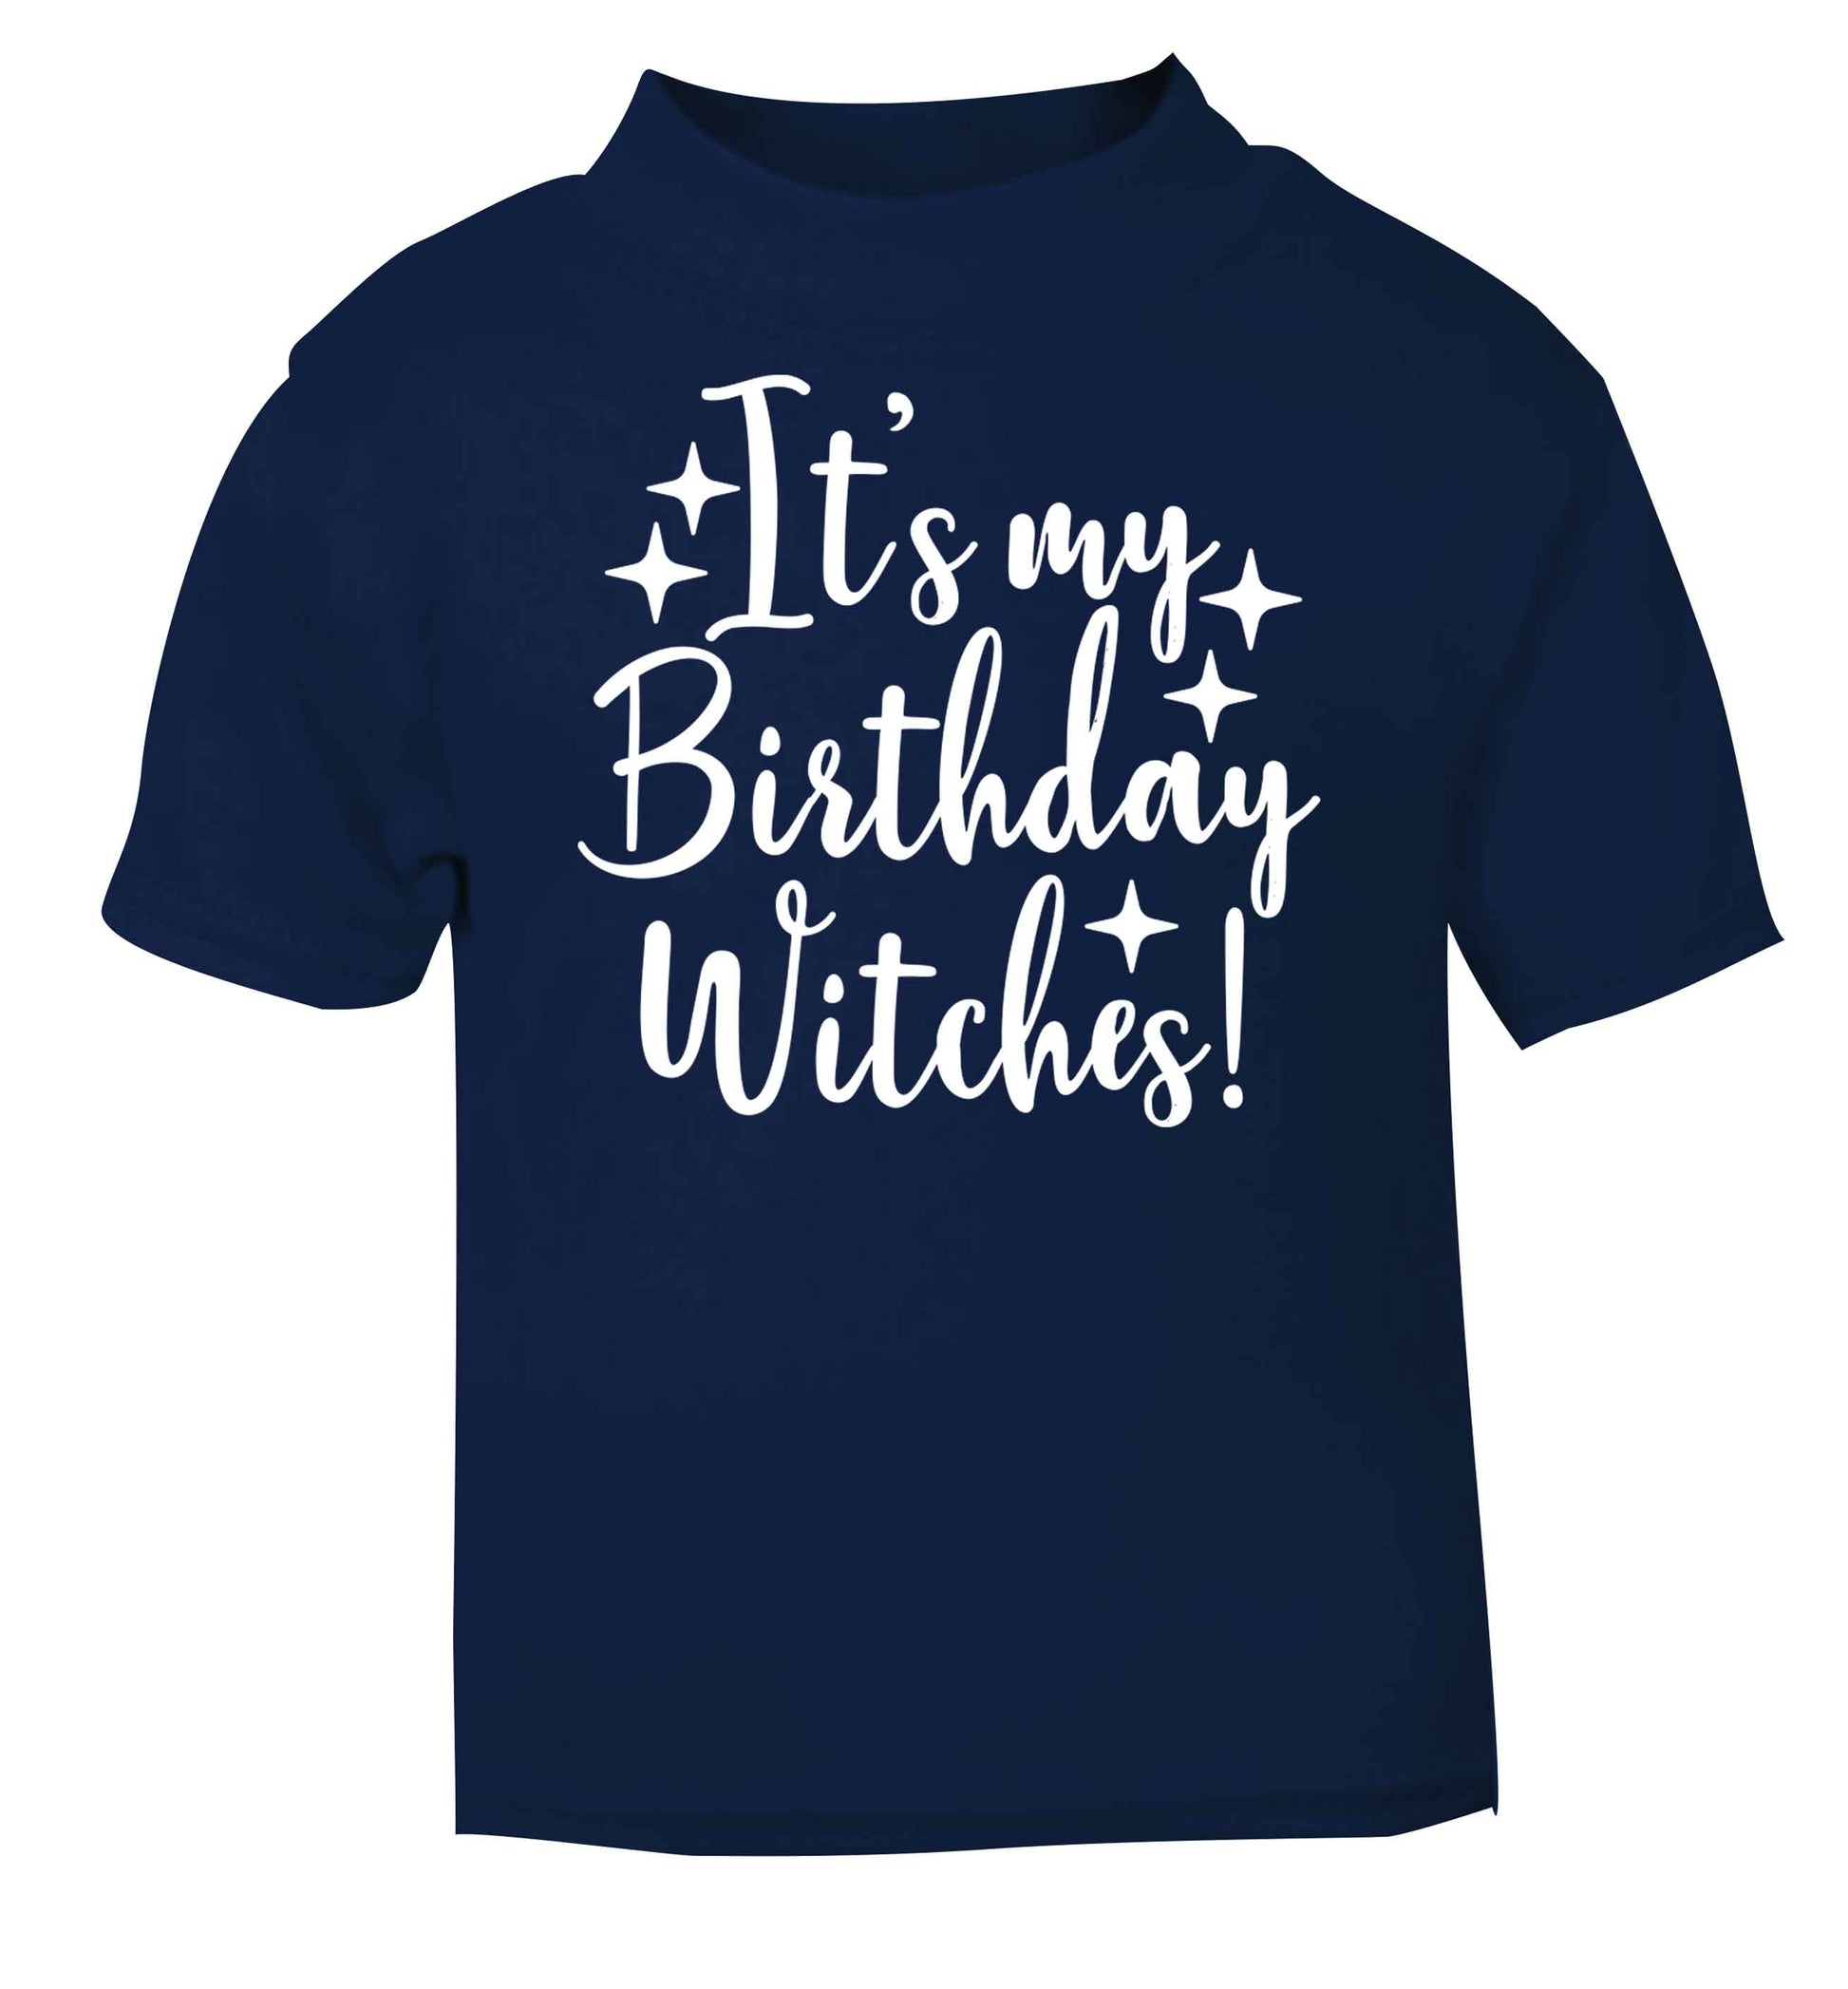 It's my birthday witches!navy baby toddler Tshirt 2 Years